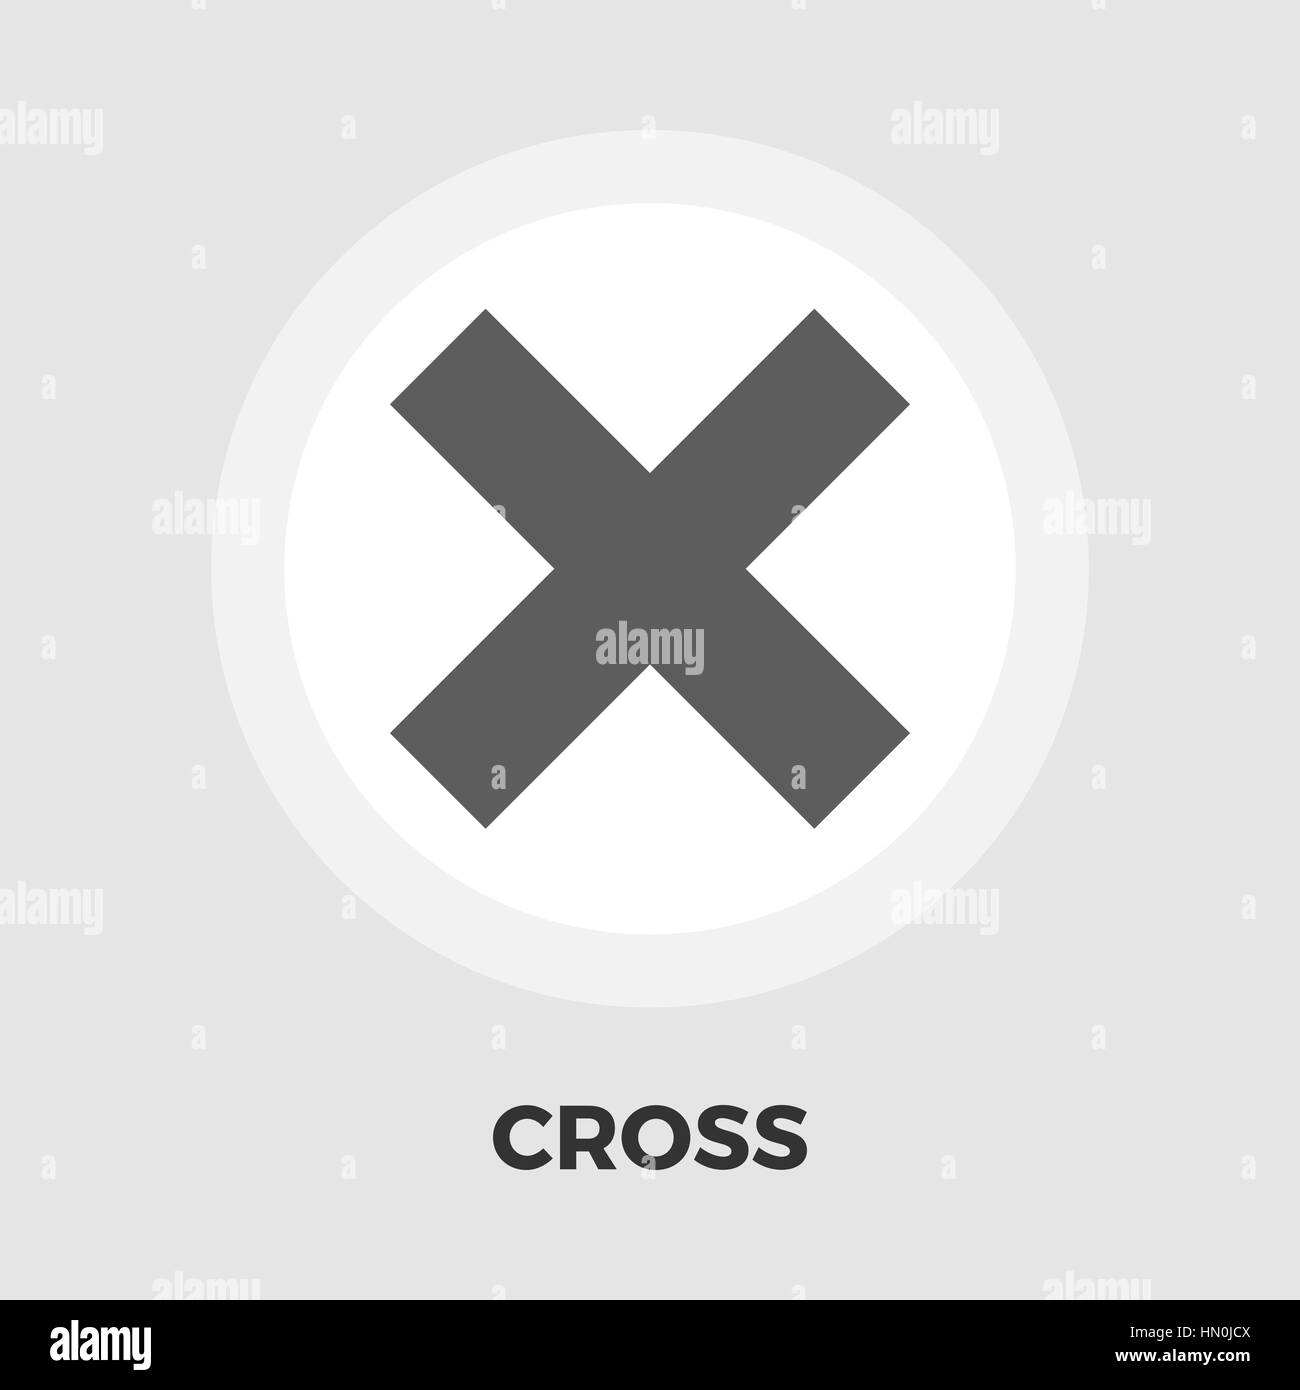 Cross icon vector. Flat icon isolated on the white background. Editable EPS file. Vector illustration. Stock Vector